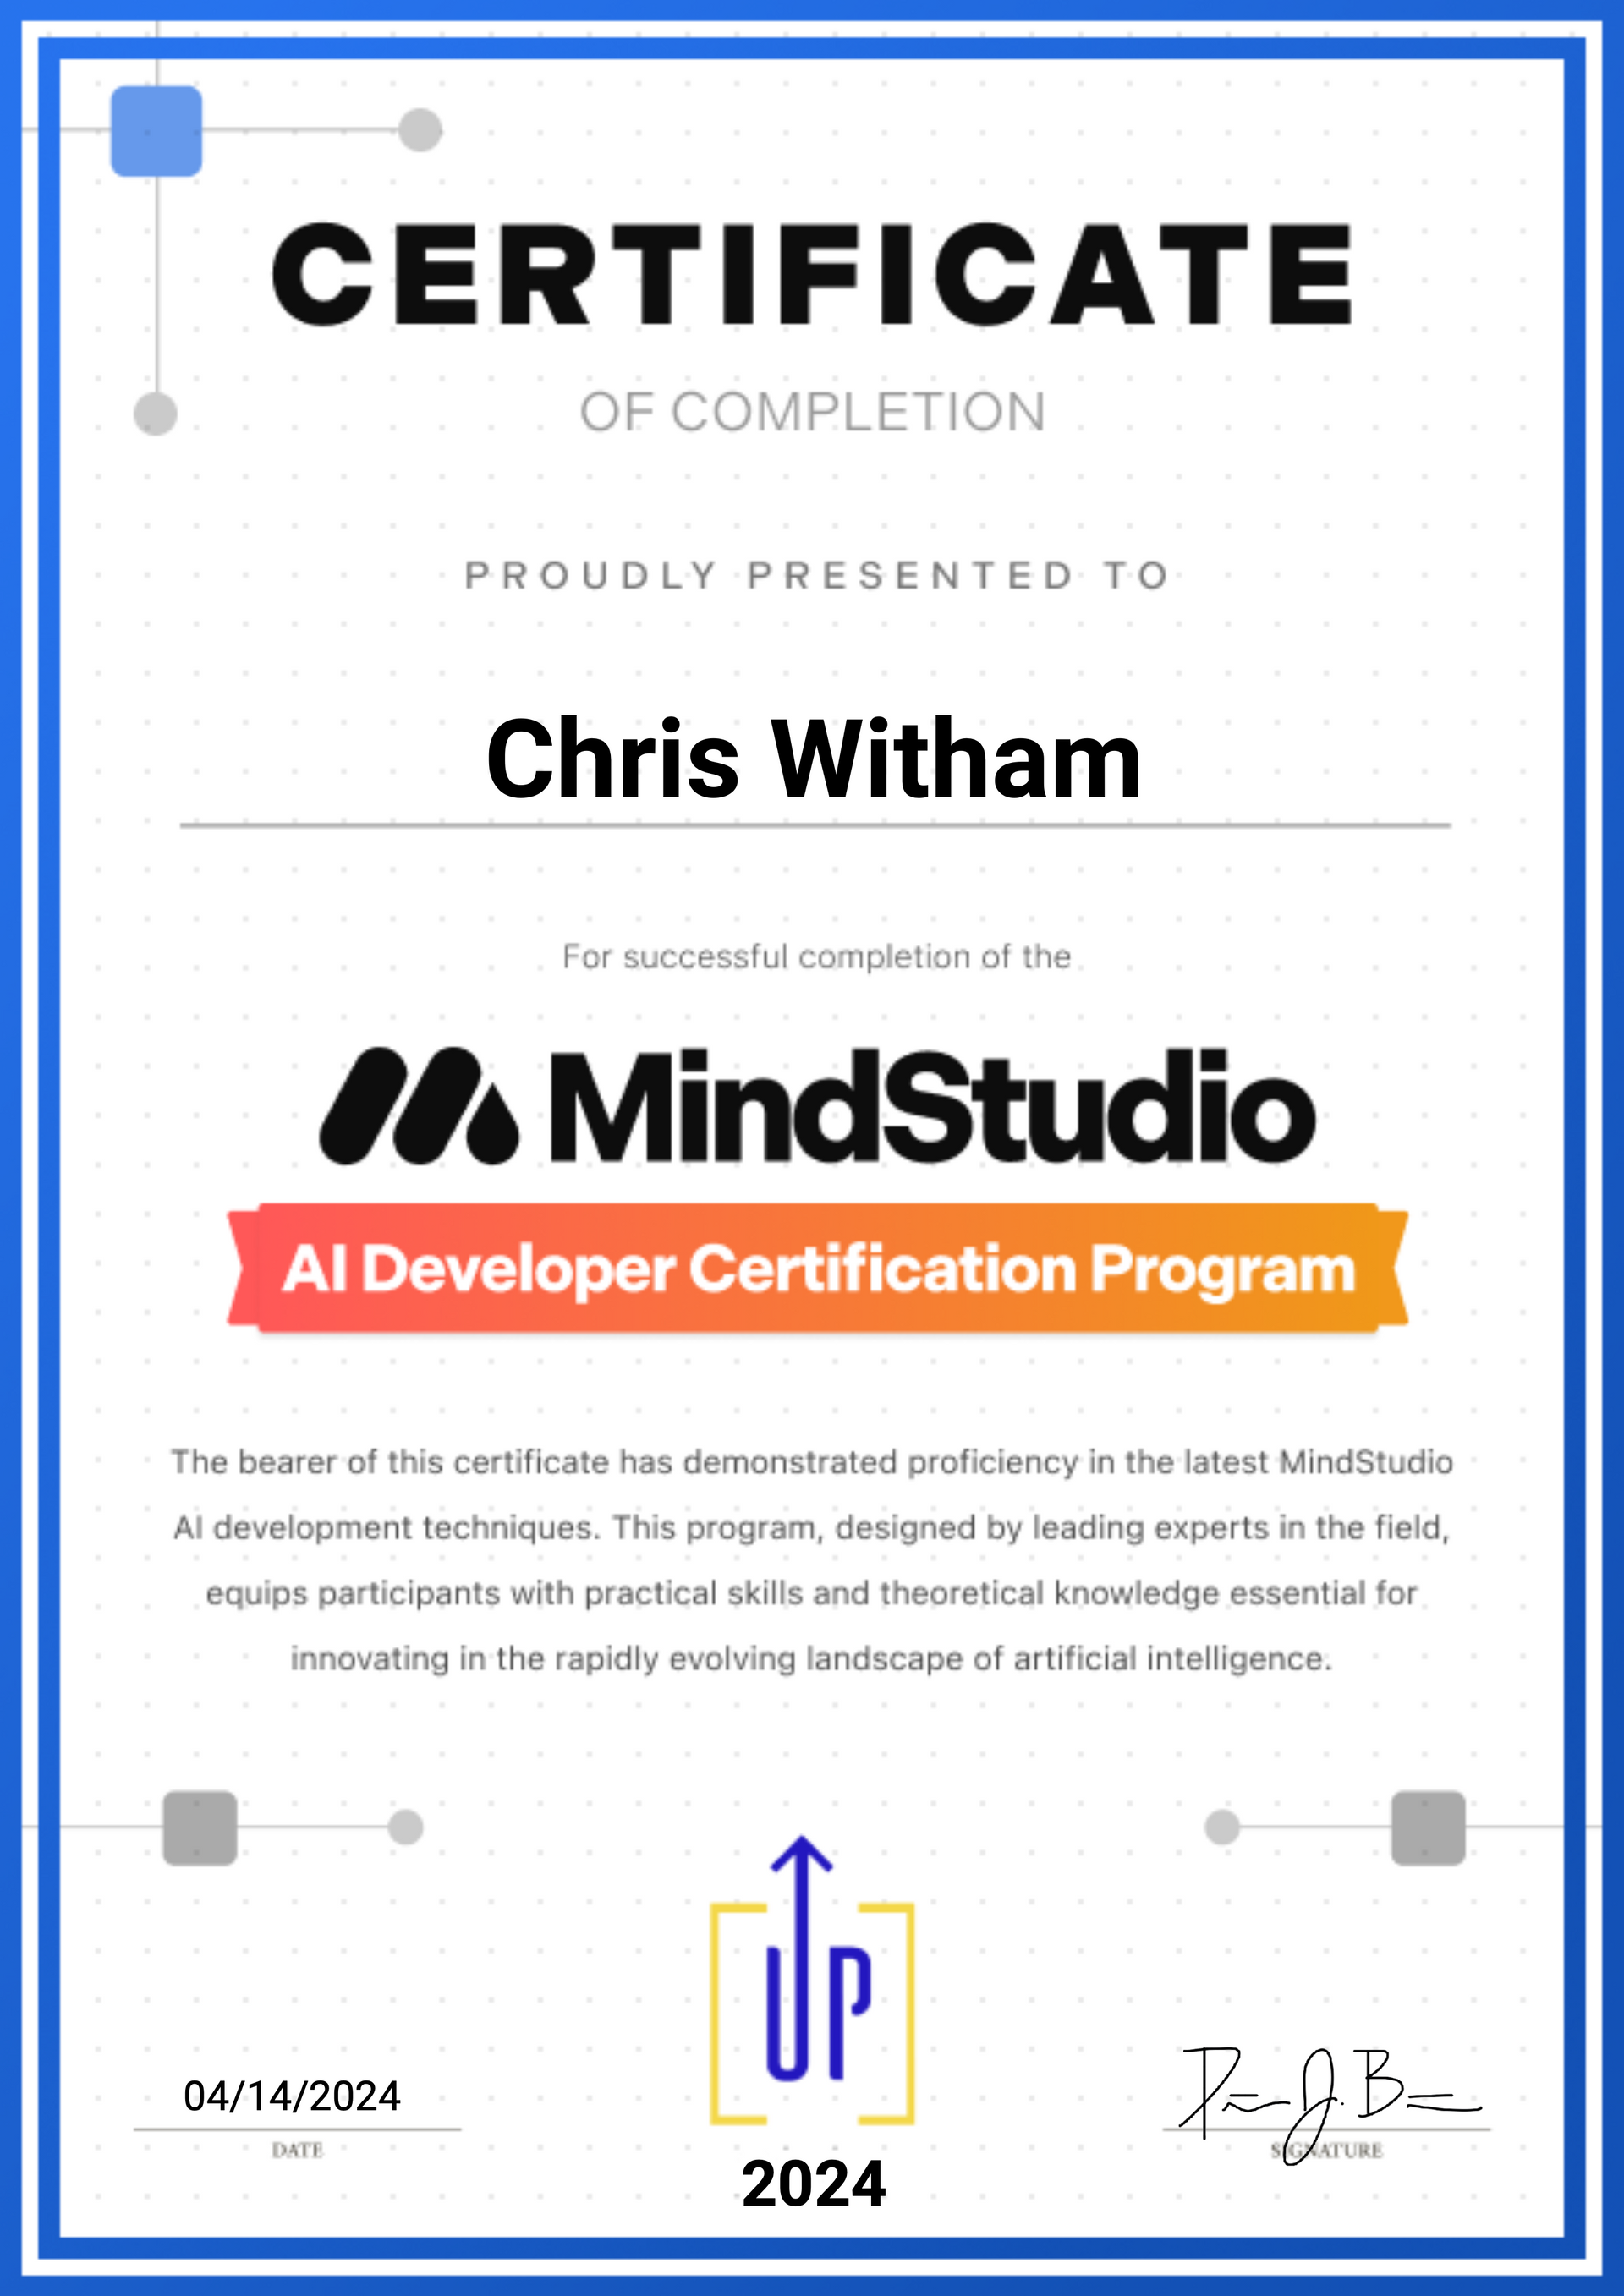 A certificate of completion for chris witham from mindstudio